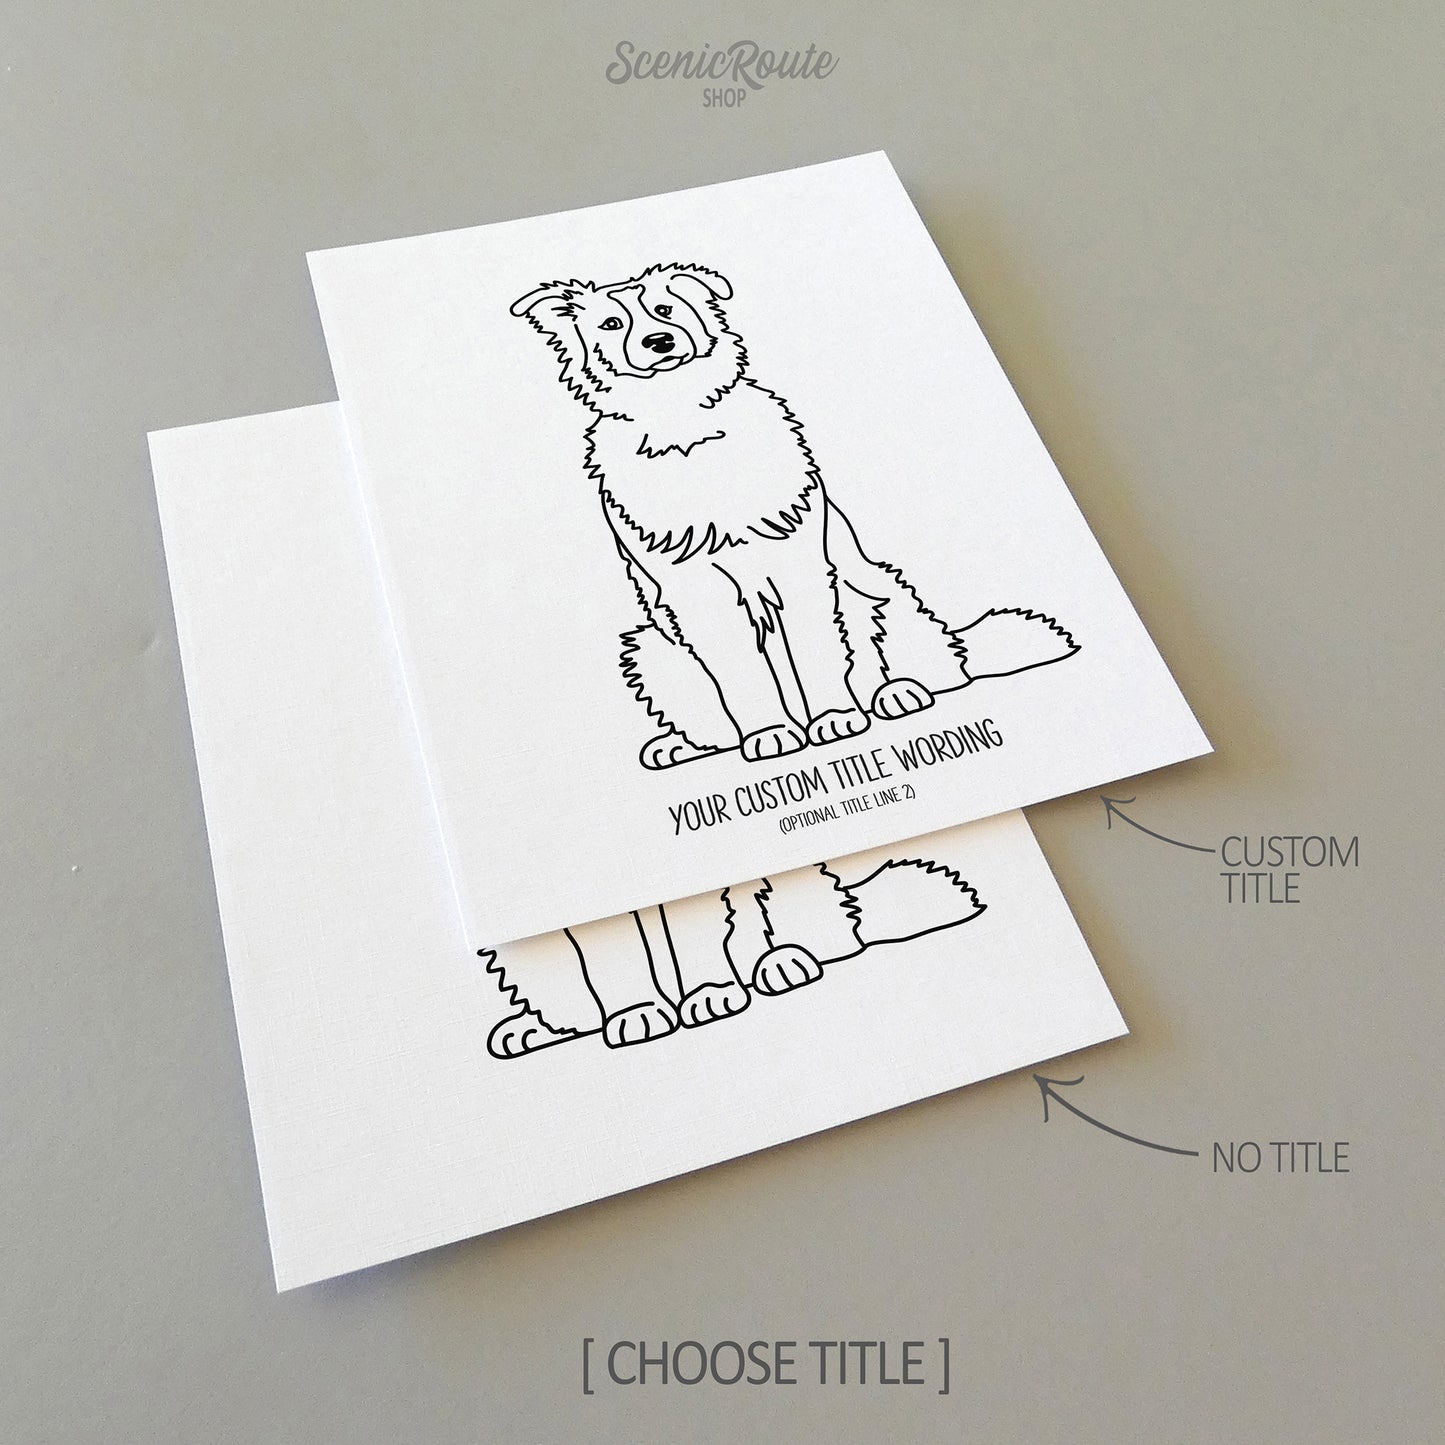 Two drawings of an Australian Shepherd dog on white linen paper with a gray background.  Pieces are shown with “No Title” and “Custom Title” options to illustrate the available art print options.